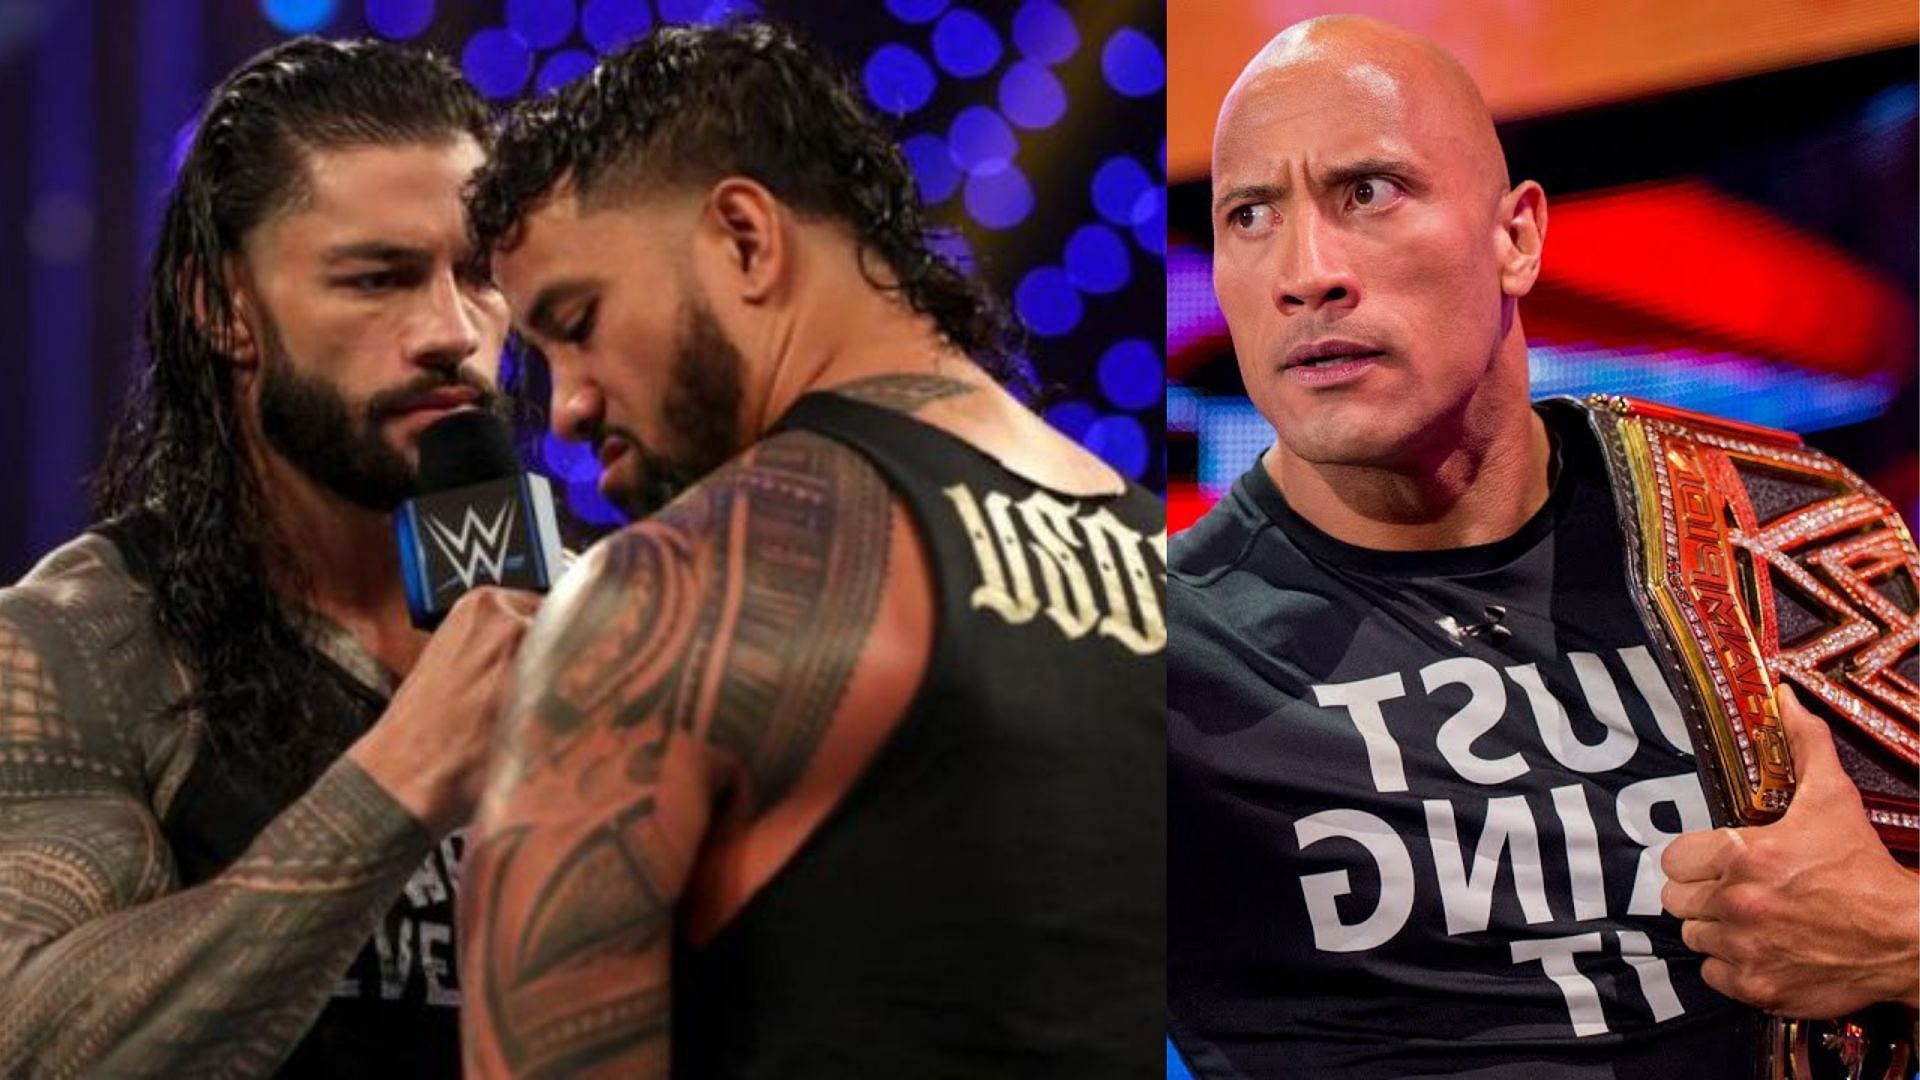 How long will Jey Uso keep up with Reigns